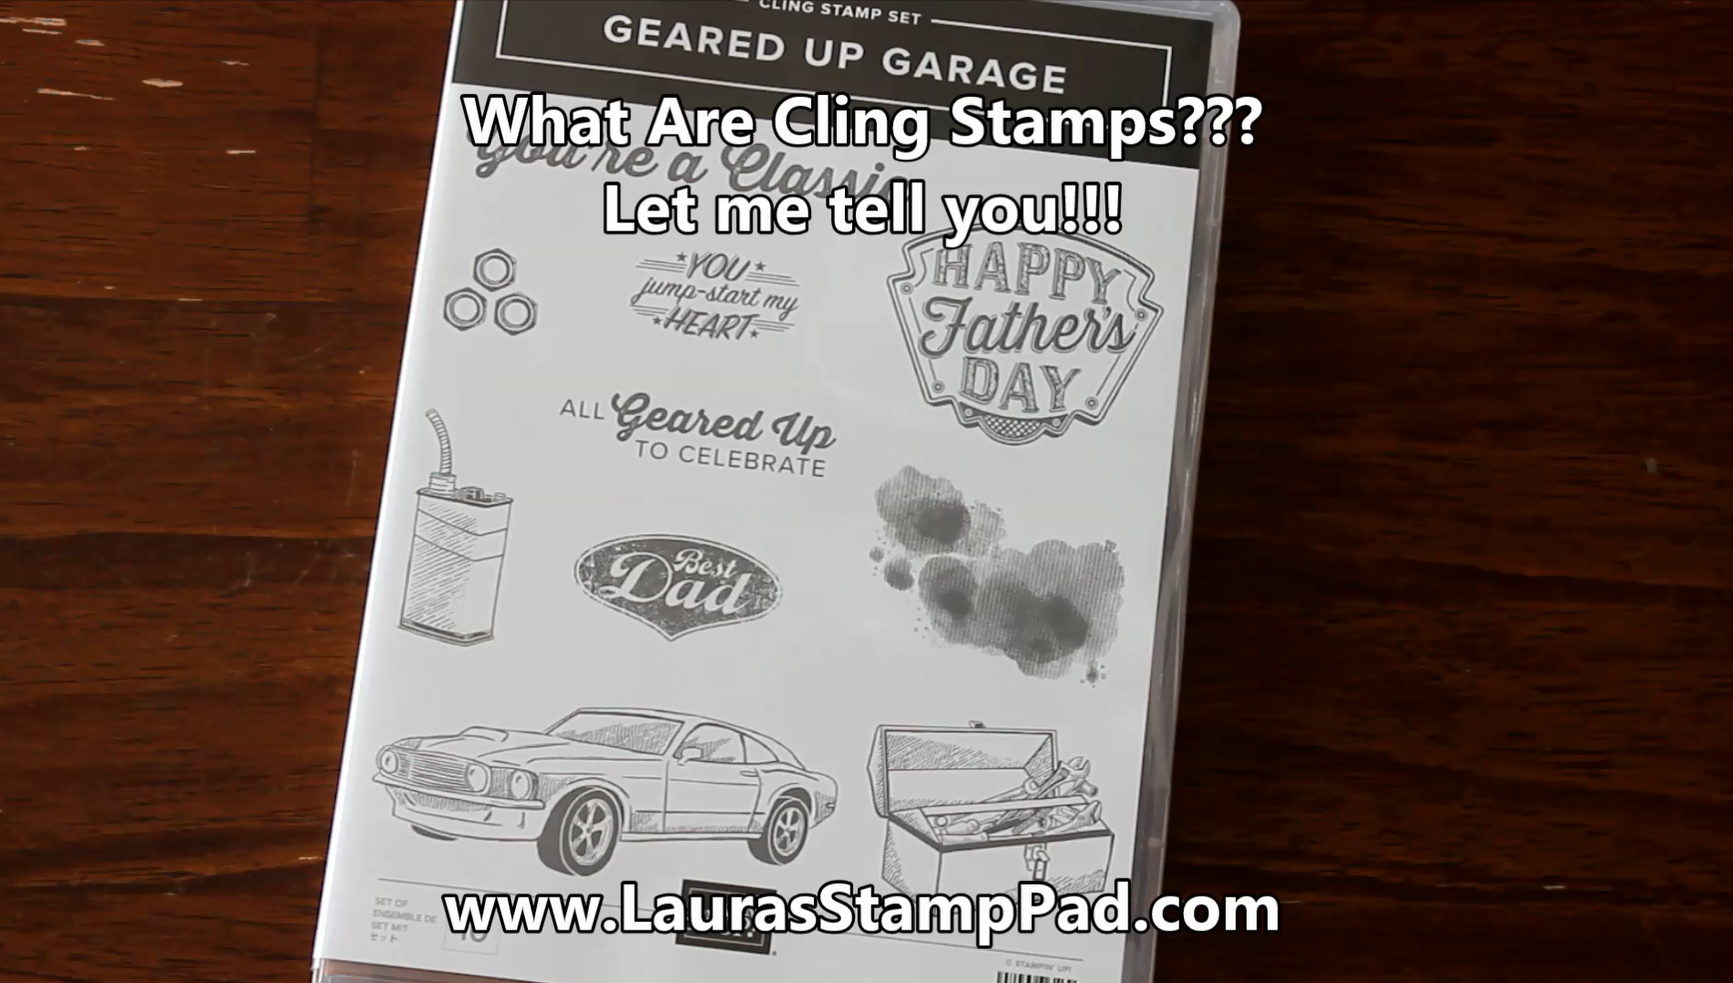 What are cling stamps, www.LaurasStampPad.com